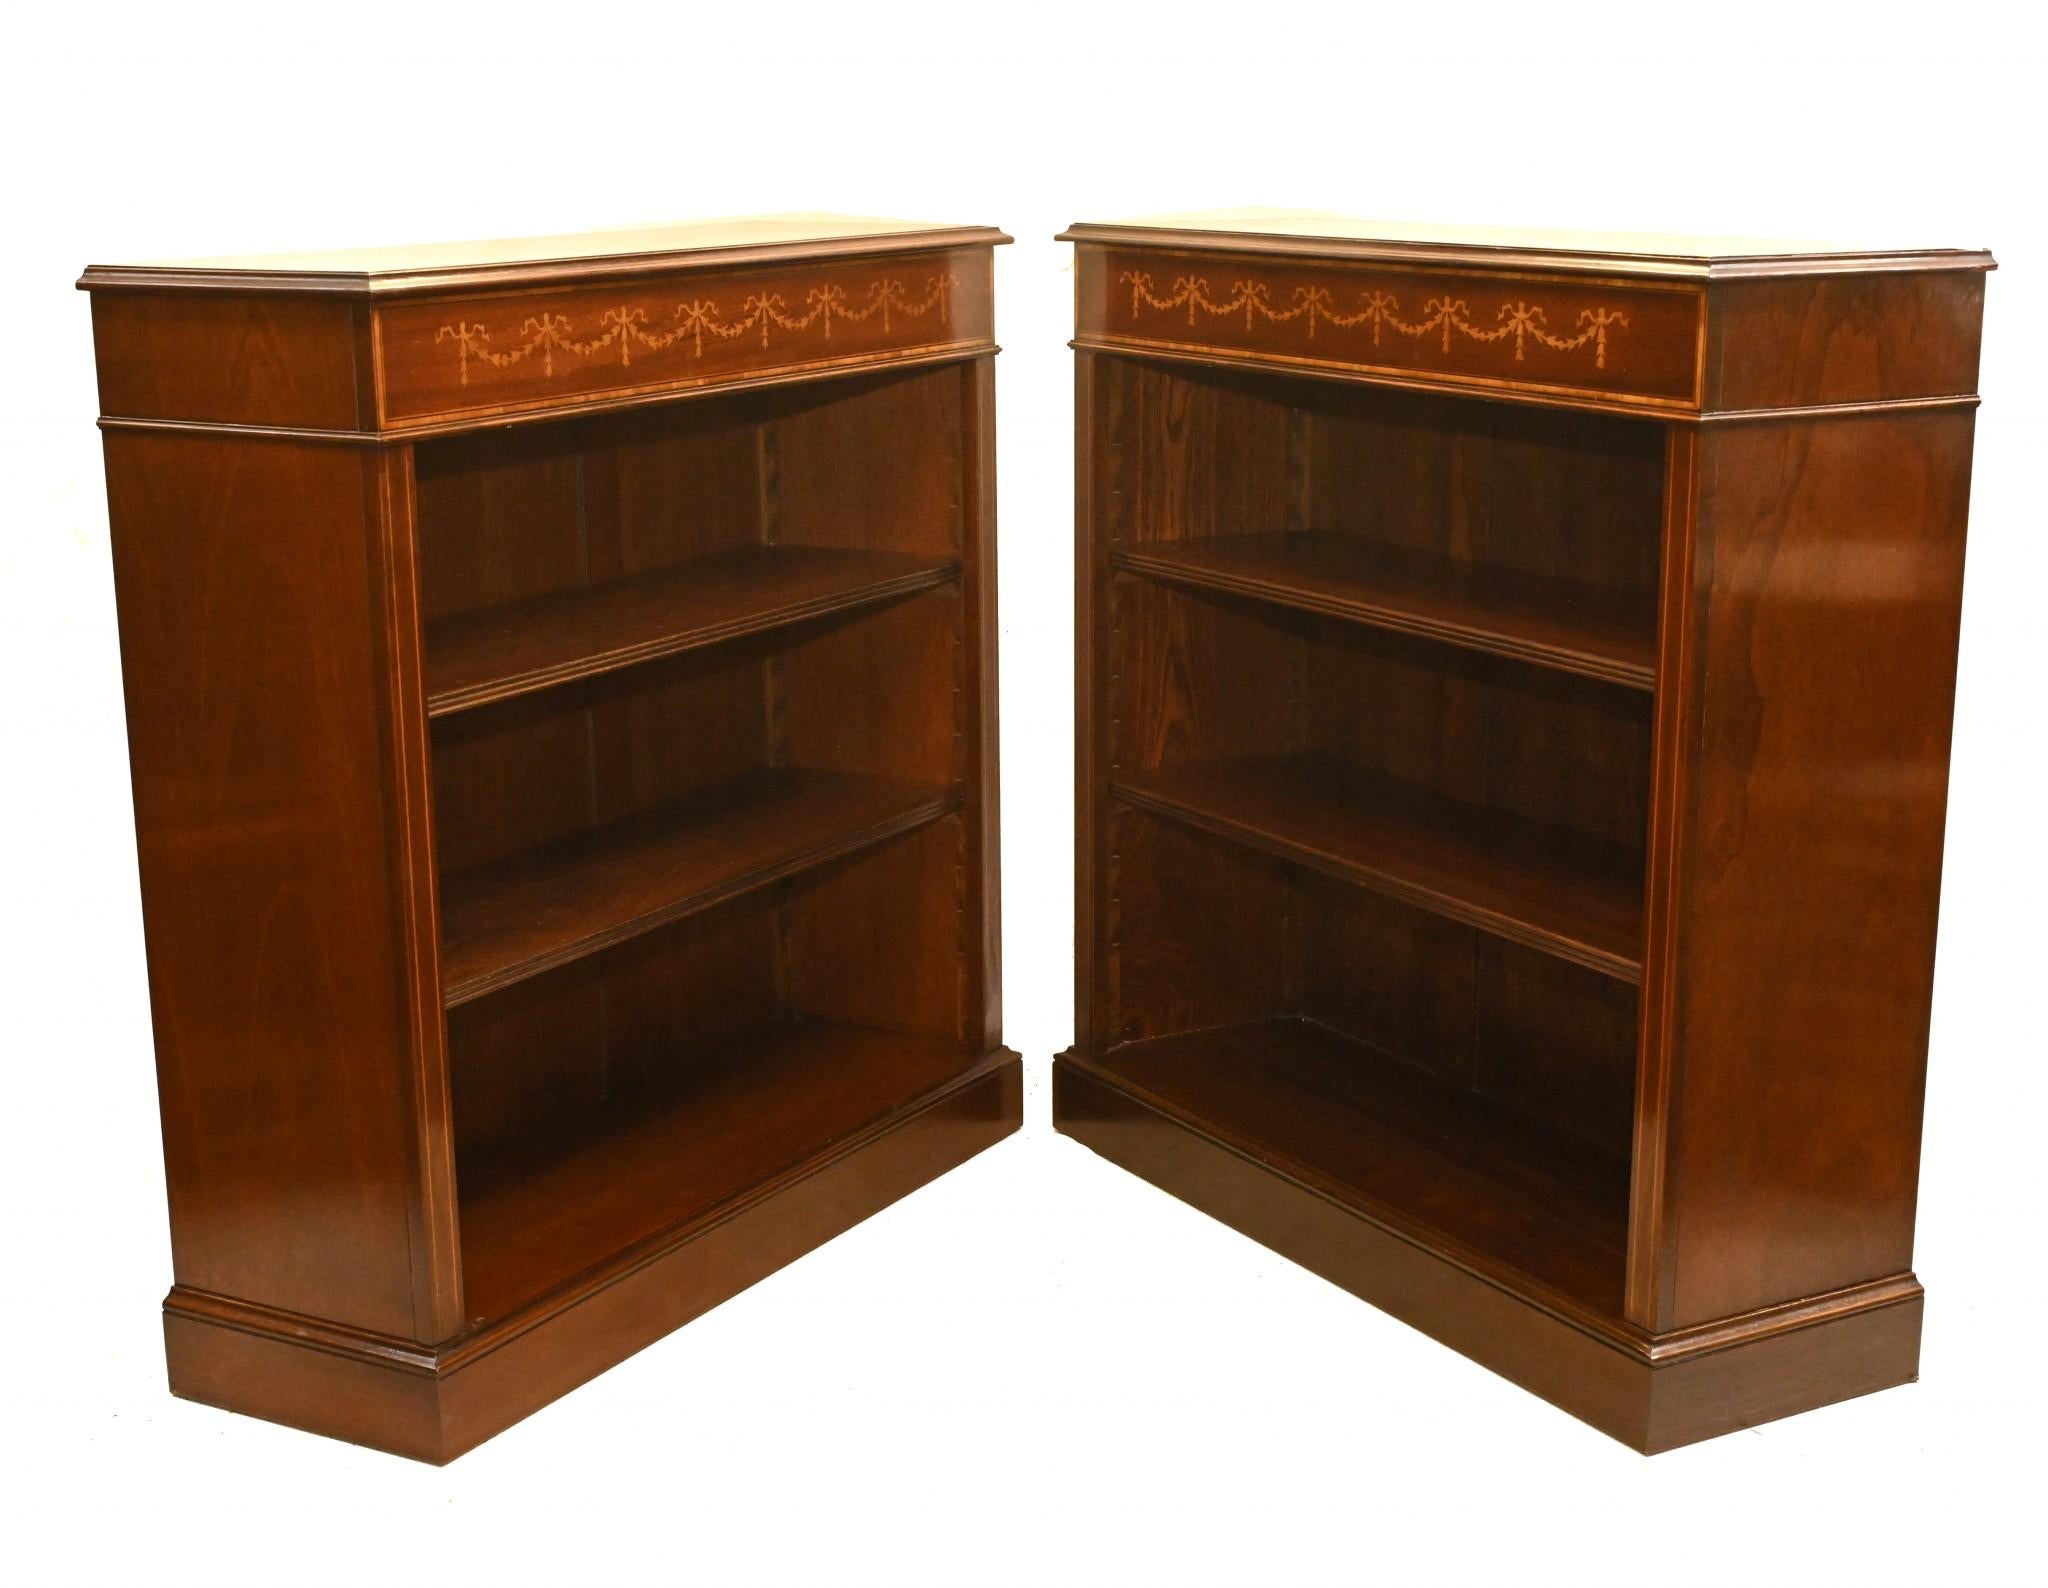 Viewings possible in our Hertfordshire warehouse - please contact for an appointment
Gorgeous pair of English Sheraton style low openfront bookcases hand crafted from mahogany
Hand crafted in England to centuries old traditions - will last for